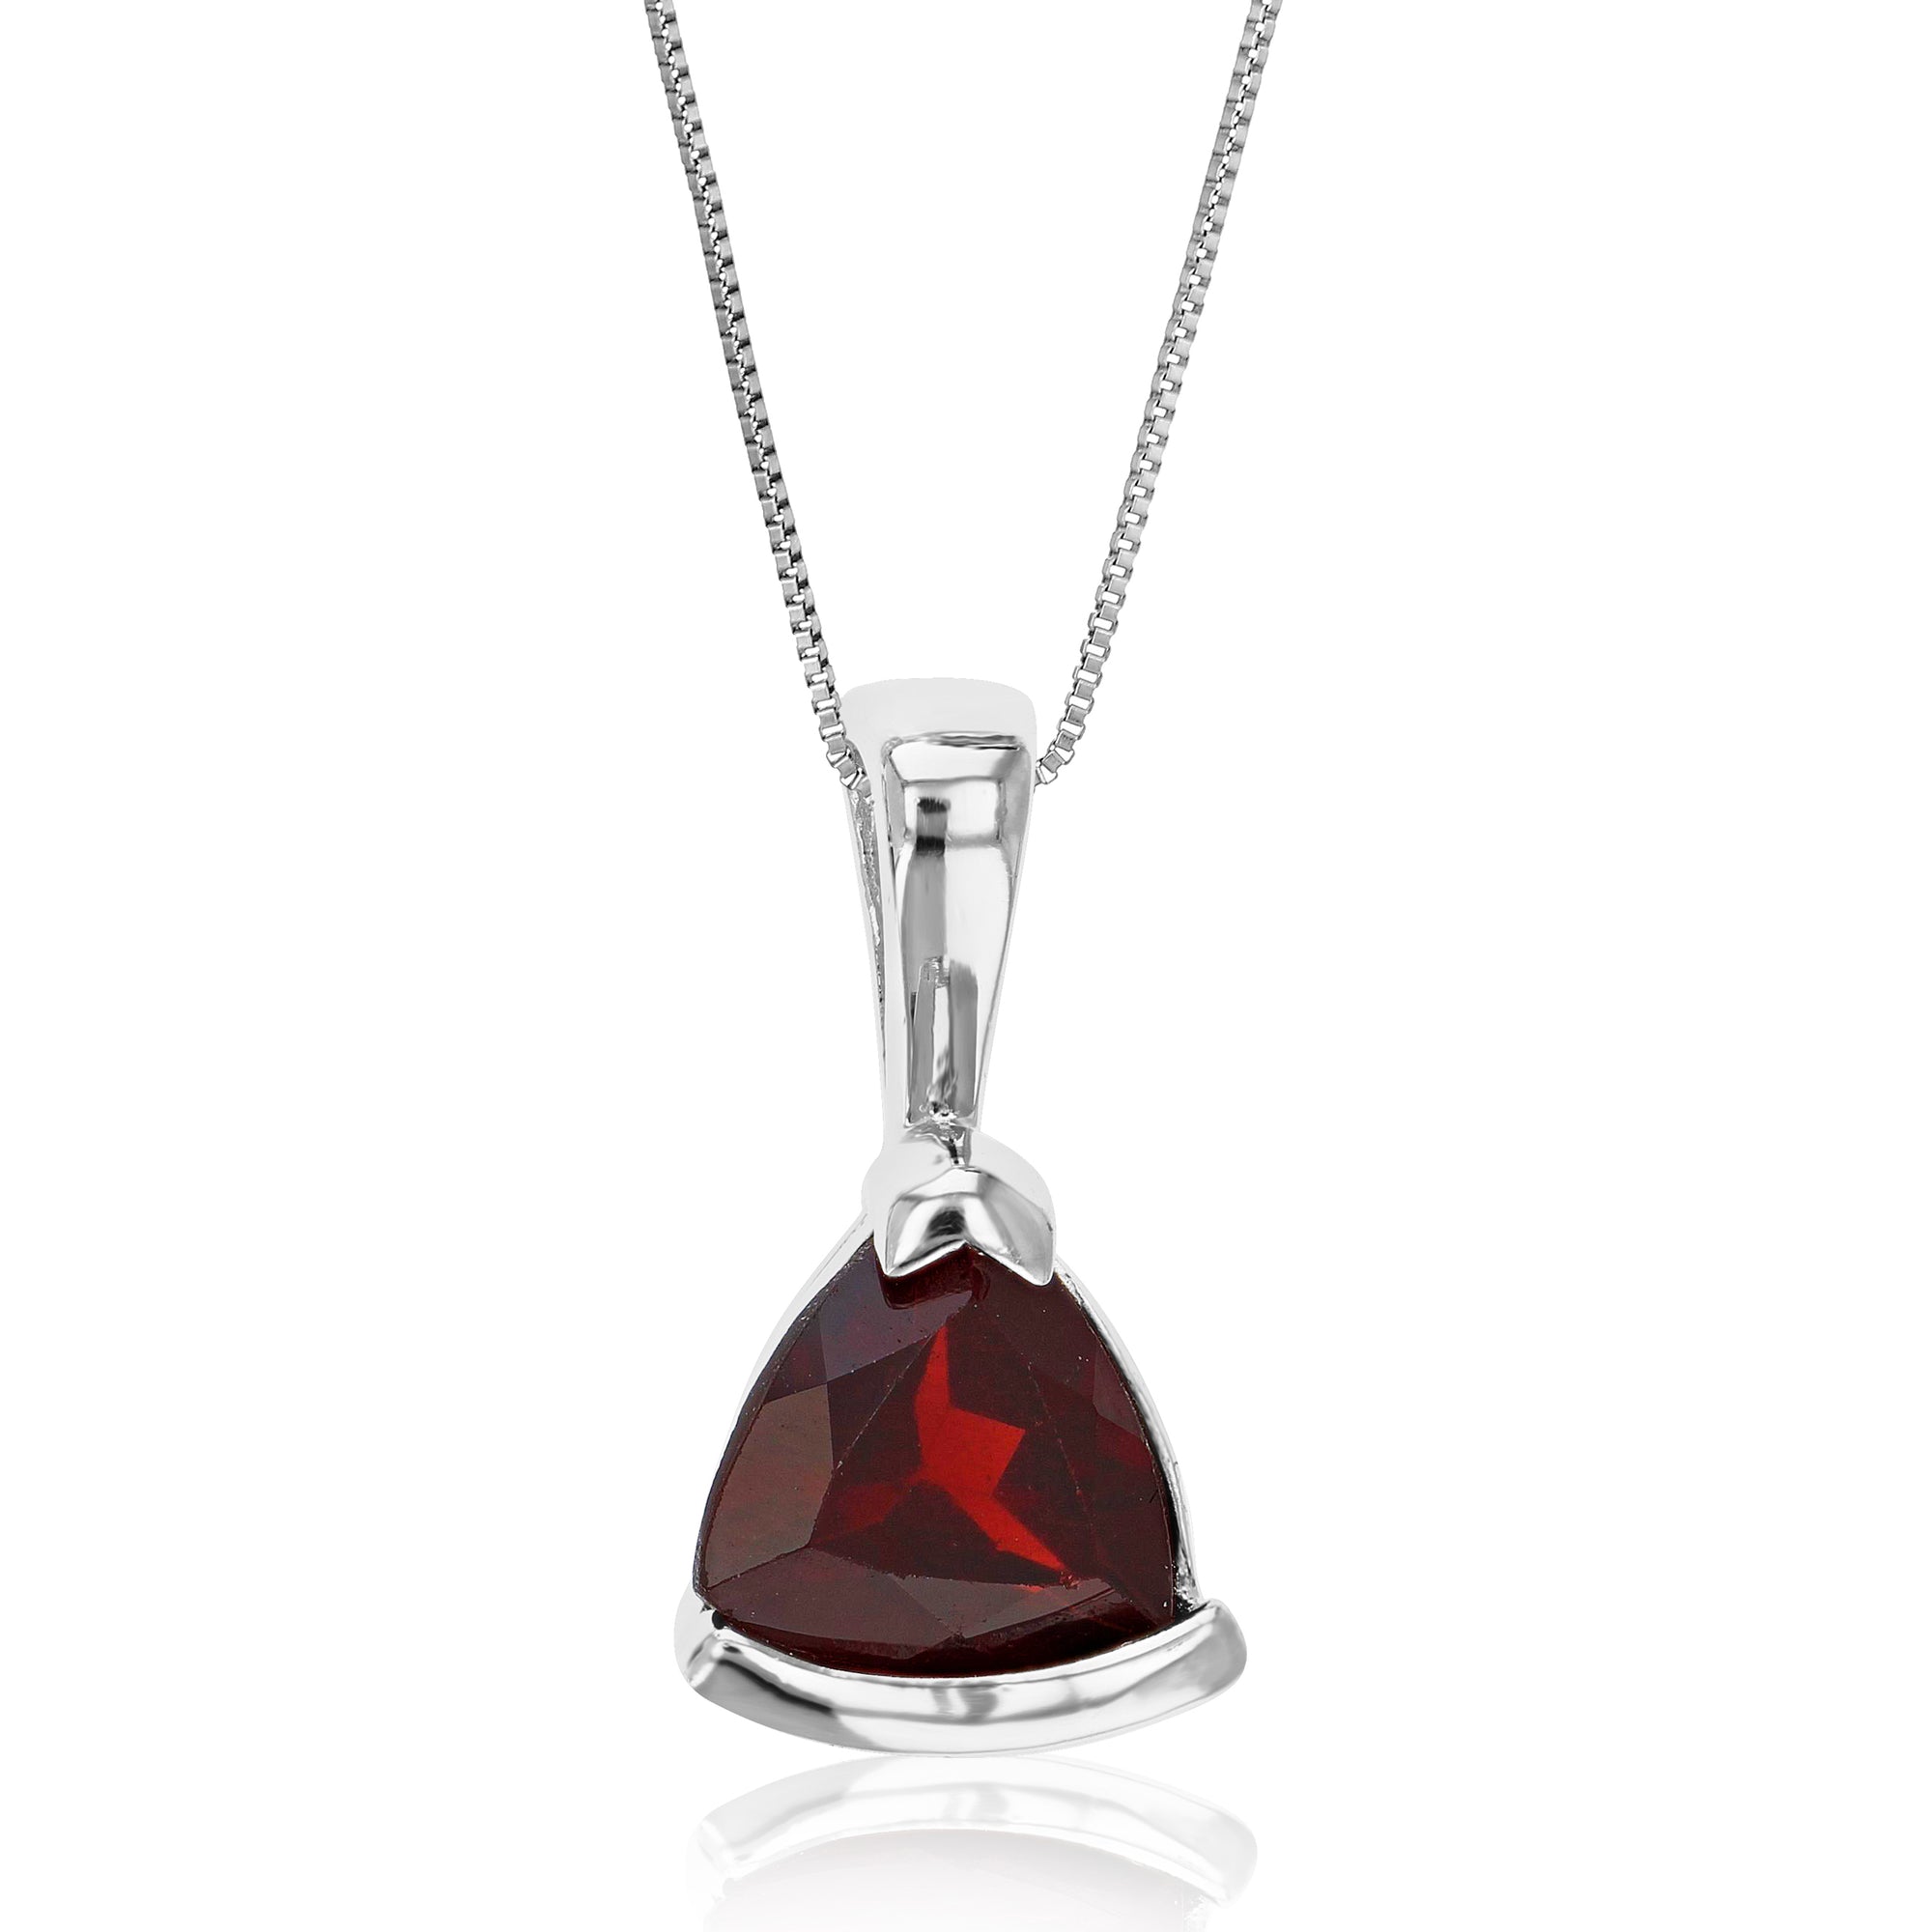 0.80 cttw Pendant Necklace, Garnet Trillion Shape Pendant Necklace for Women in .925 Sterling Silver with Rhodium, 18 Inch Chain, Bezel Setting